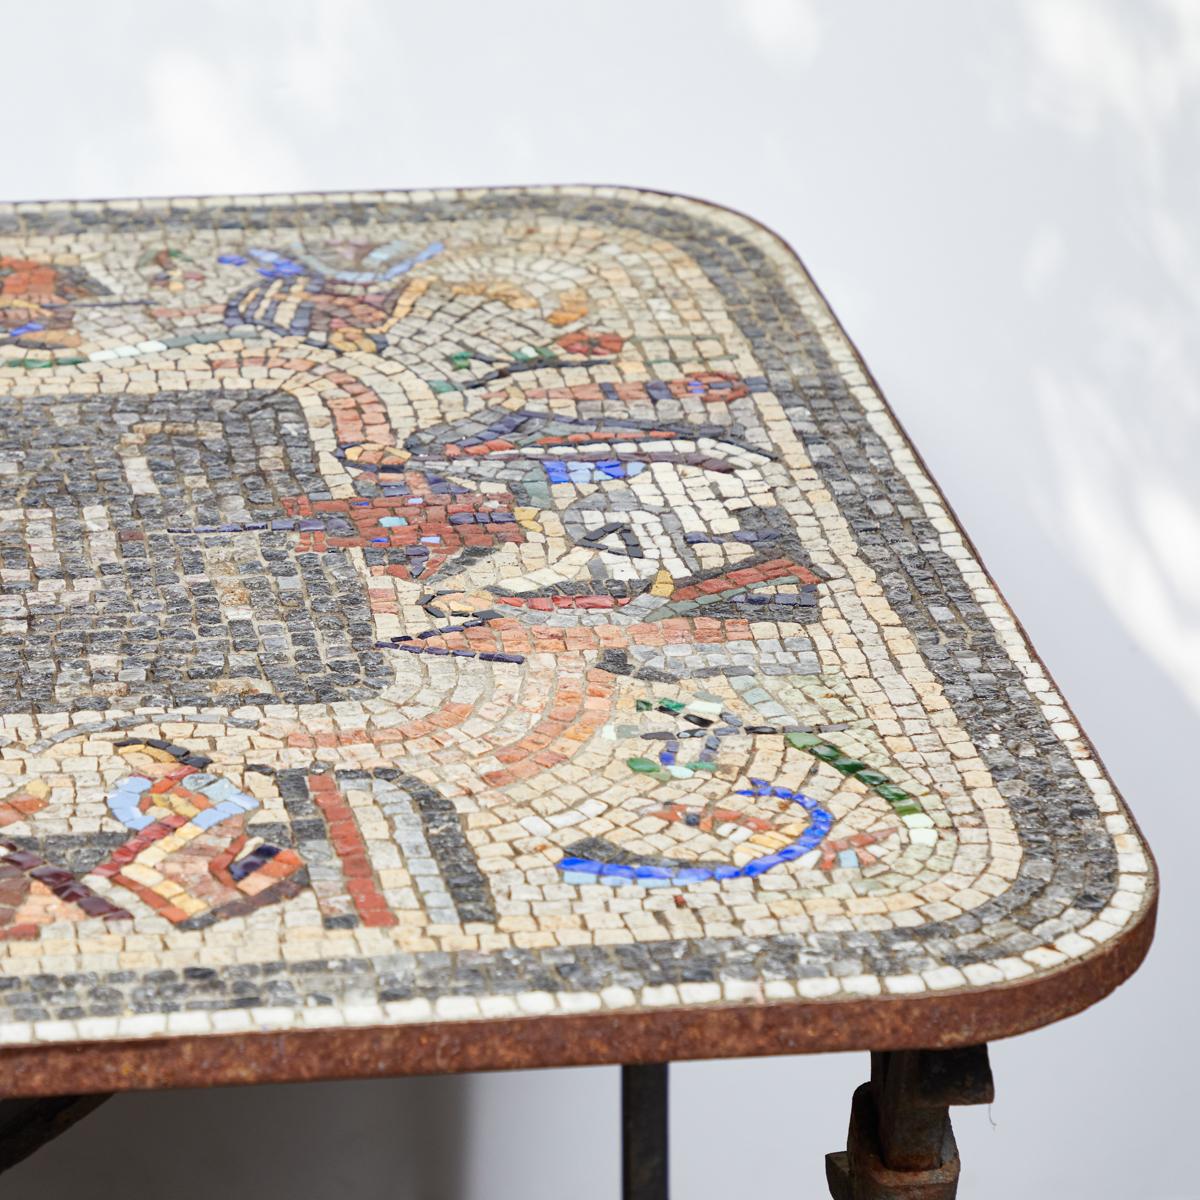 Mosaic topped iron table from turn-of-the-century England. The beautiful mosaic surface contains a number of figurative representations arranged in a ring around a central panel depicting water. This wonderful example of artistry and craftsmanship